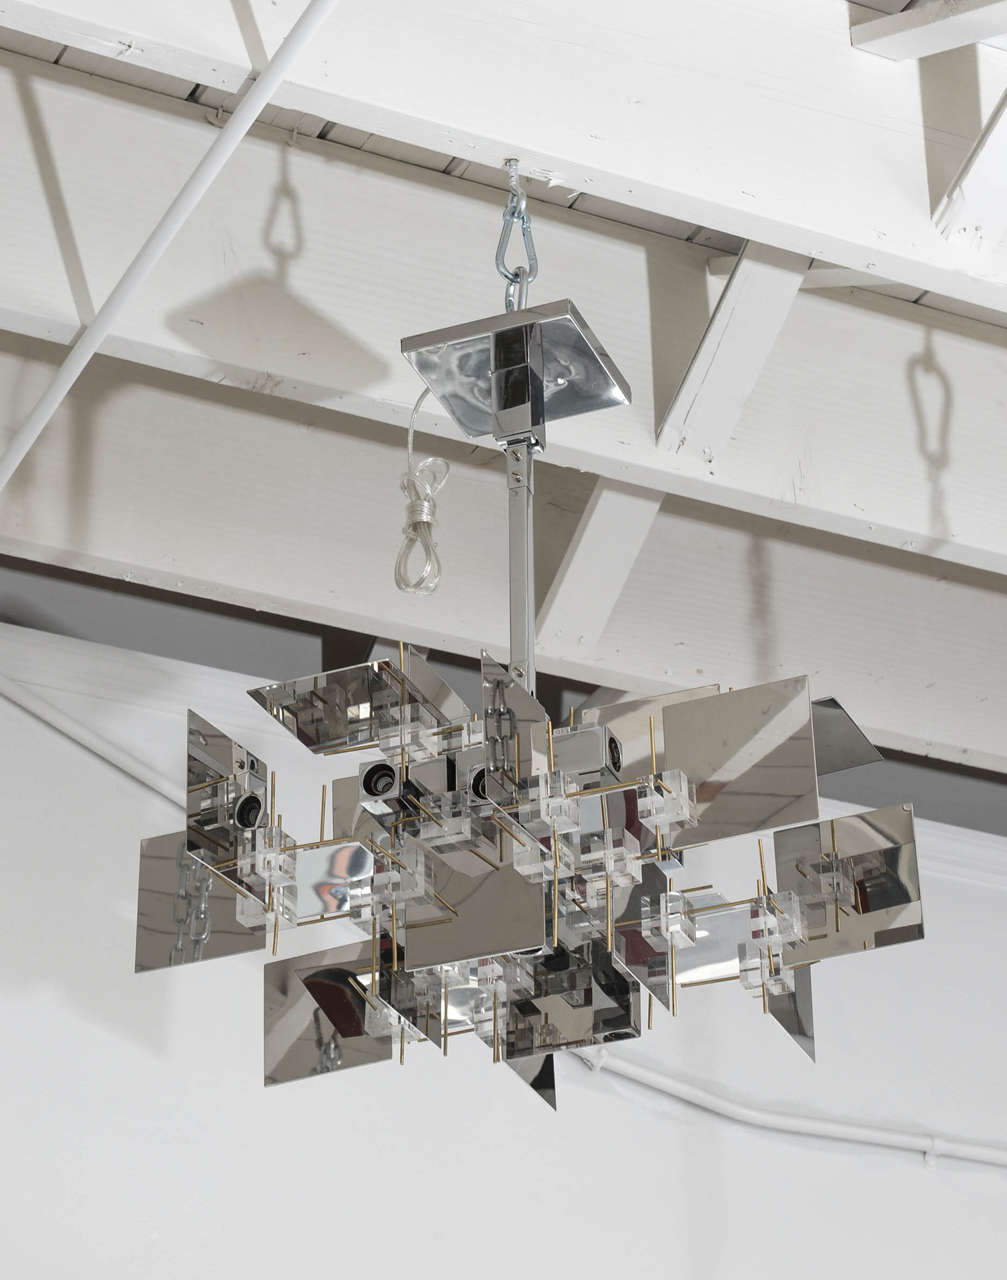 Totally refurbished 1970s Gaetano Sciolari chrome and Lucite chandelier. A true vintage piece that piece has been totally refurbished and rewired. A beautiful cubist sculptural form that would definitely enhance a modern, Midcentury or Classic